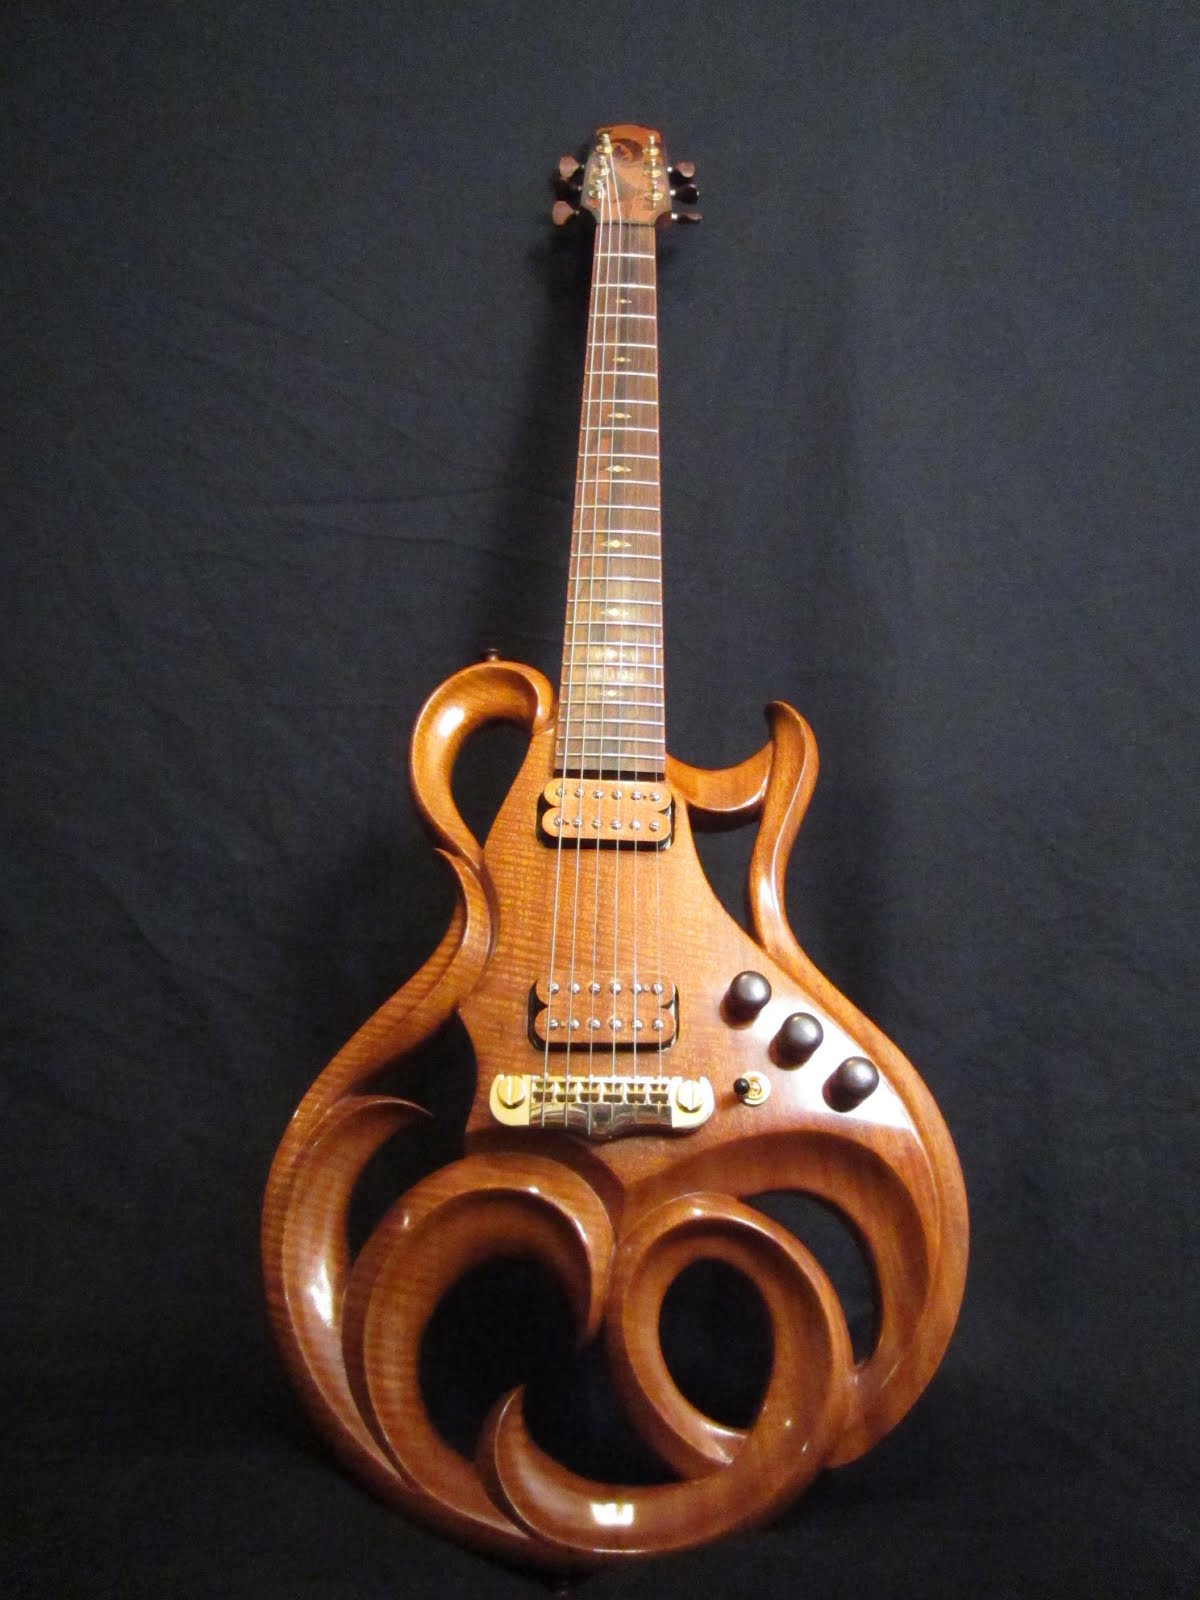 Rigaud Guitars Blog: The beautiful hand crafted Electric Guitar by ...